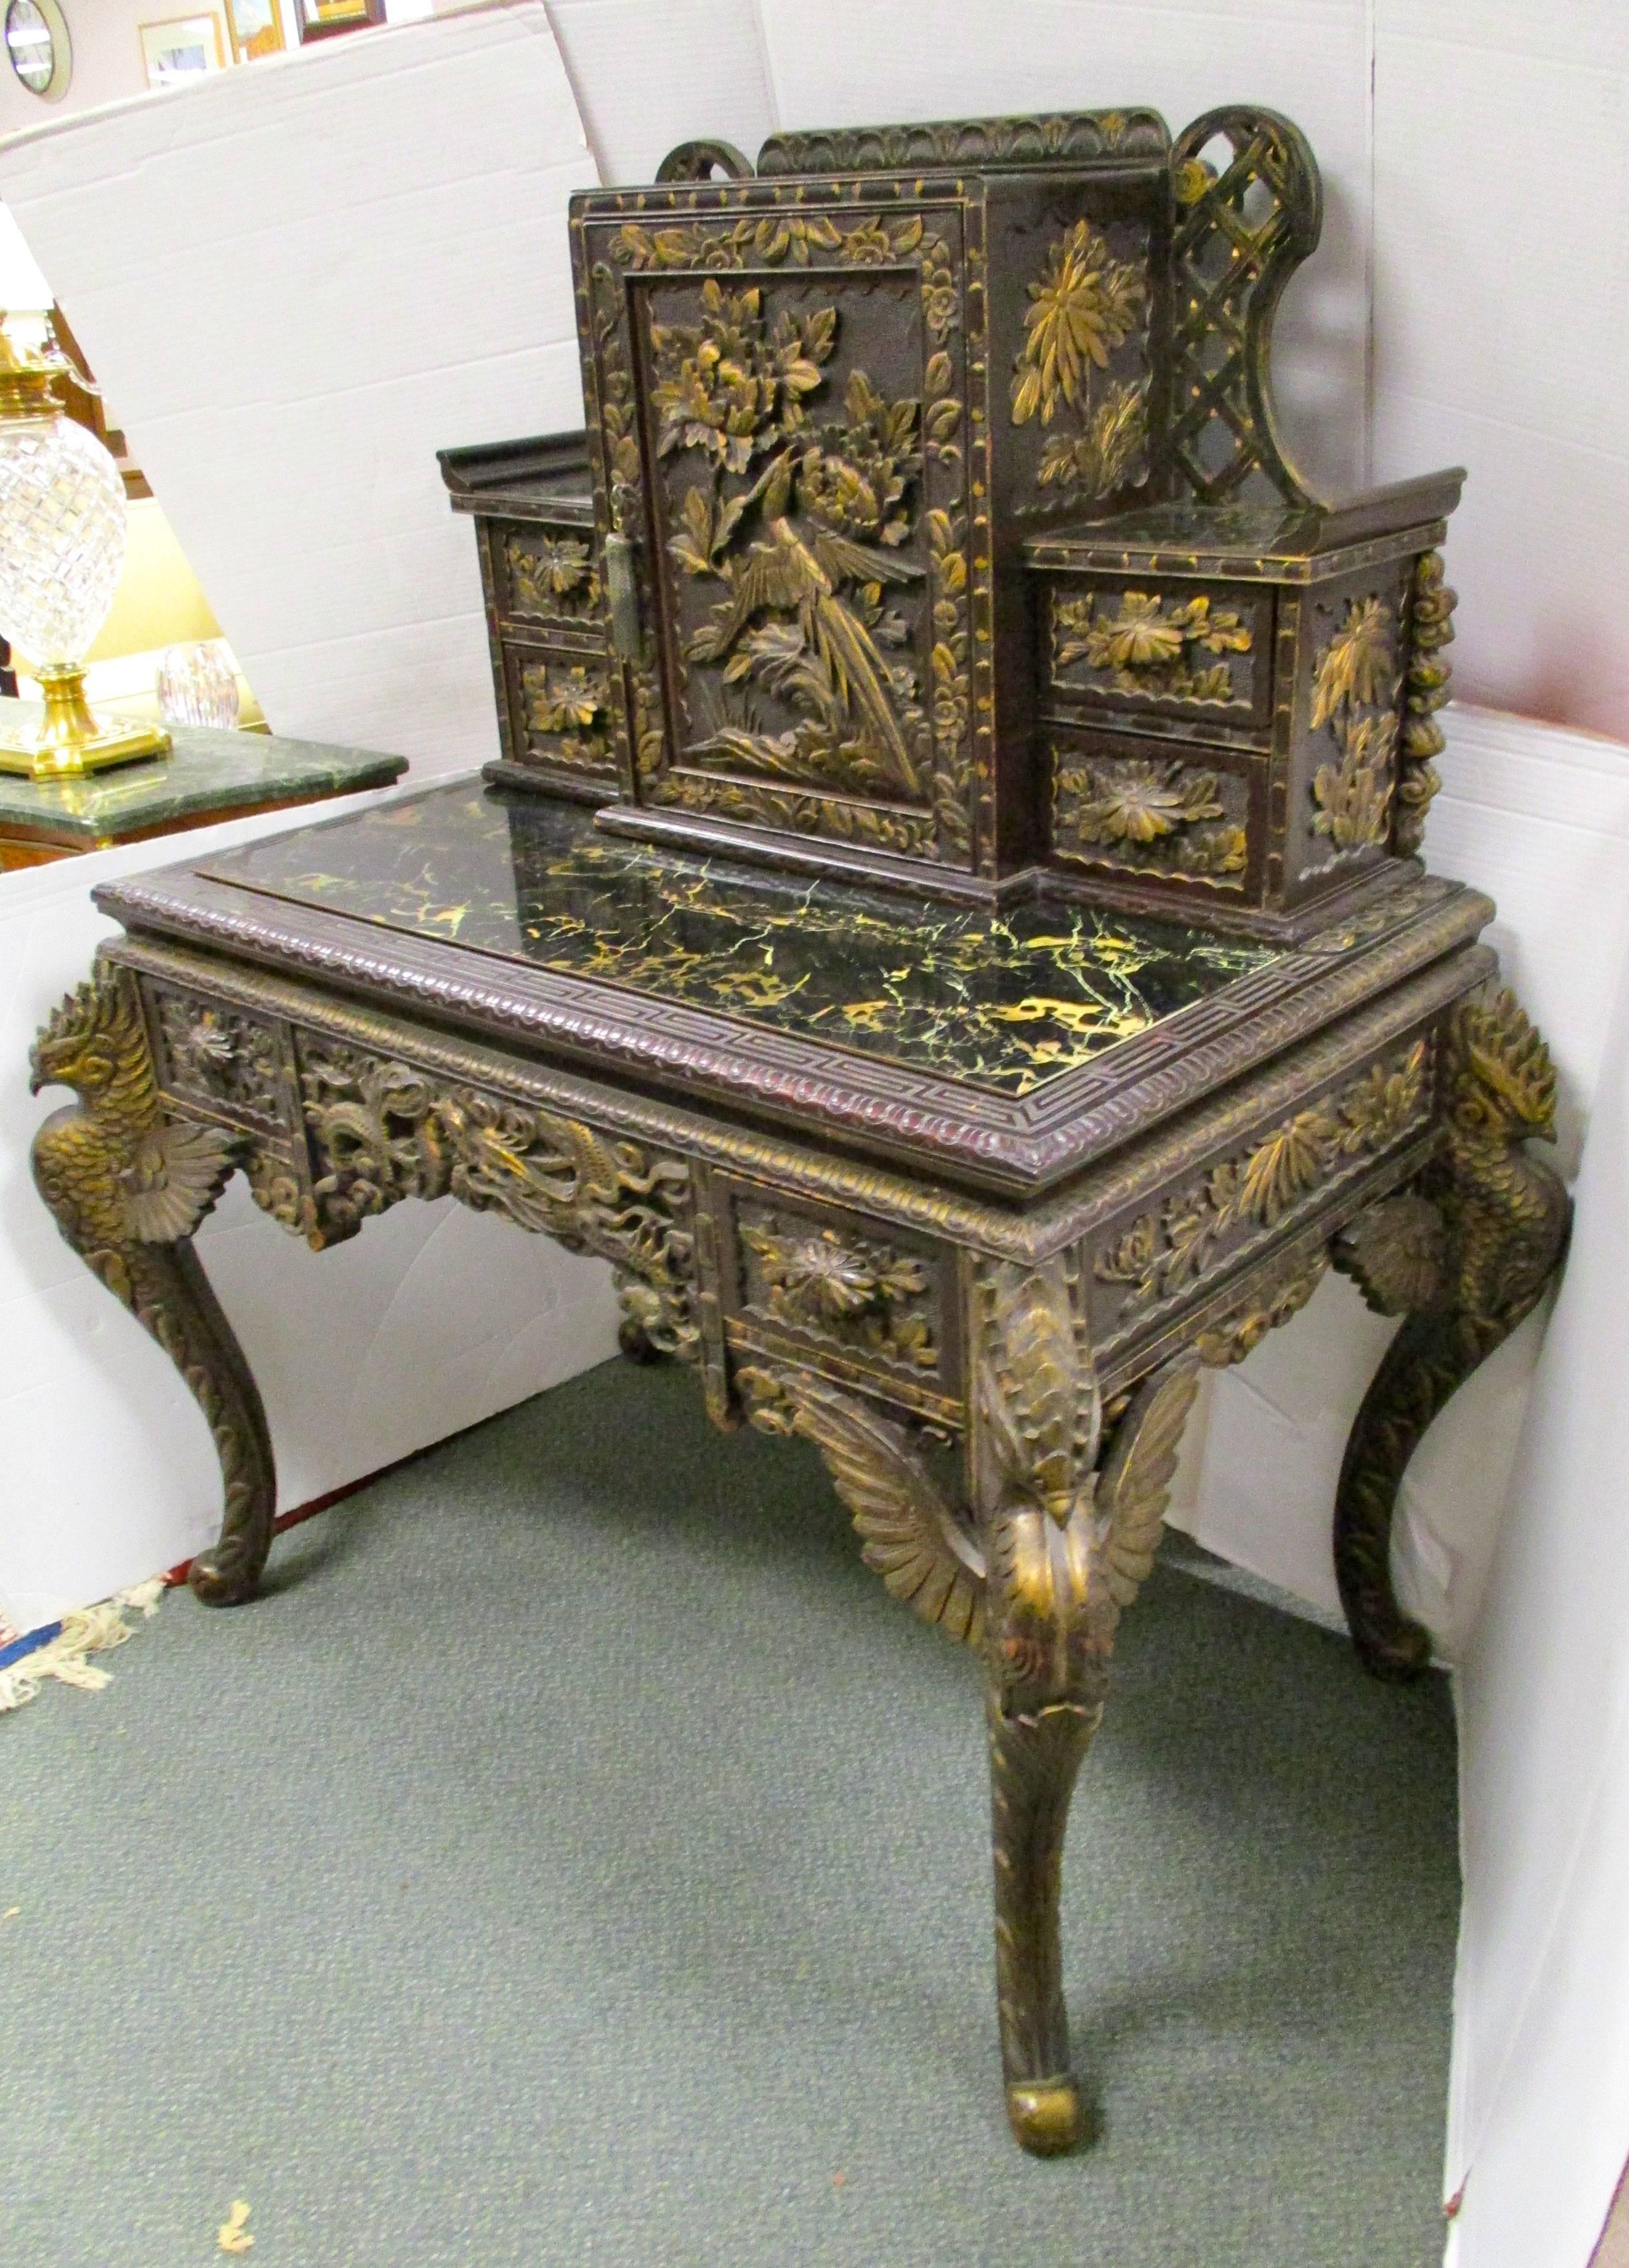 Unusual dark Chinese secretary desk, circa early 20th century, features intricately carved detail of birds and flowers with a gold finish. Carved figural birds top all four legs. Top section has four small drawers with a middle door that opens to